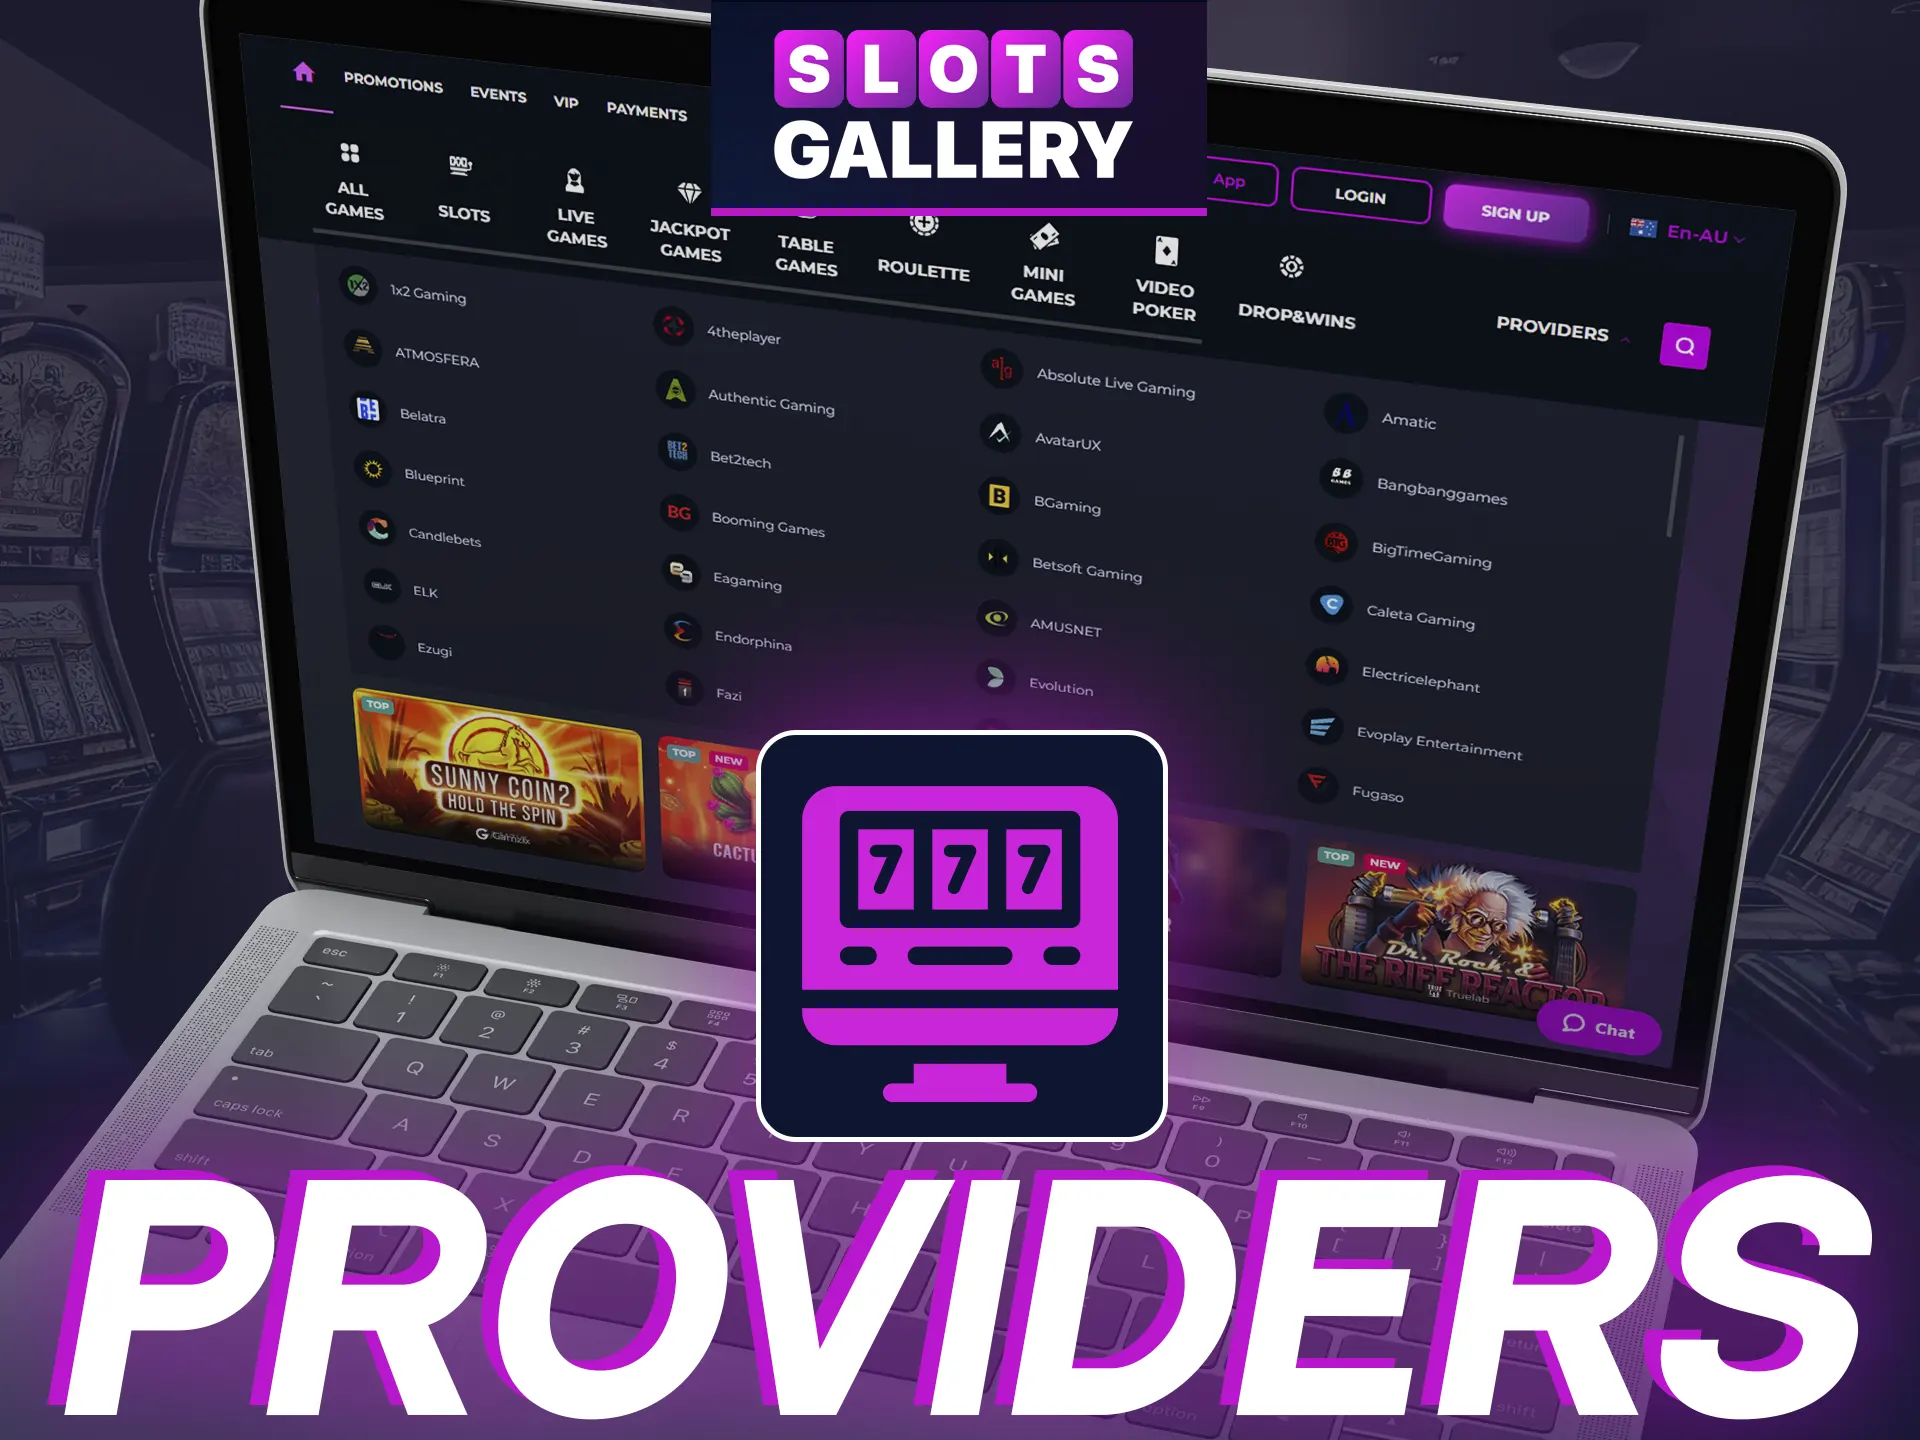 Enjoy games from best providers at Slots Gallery.